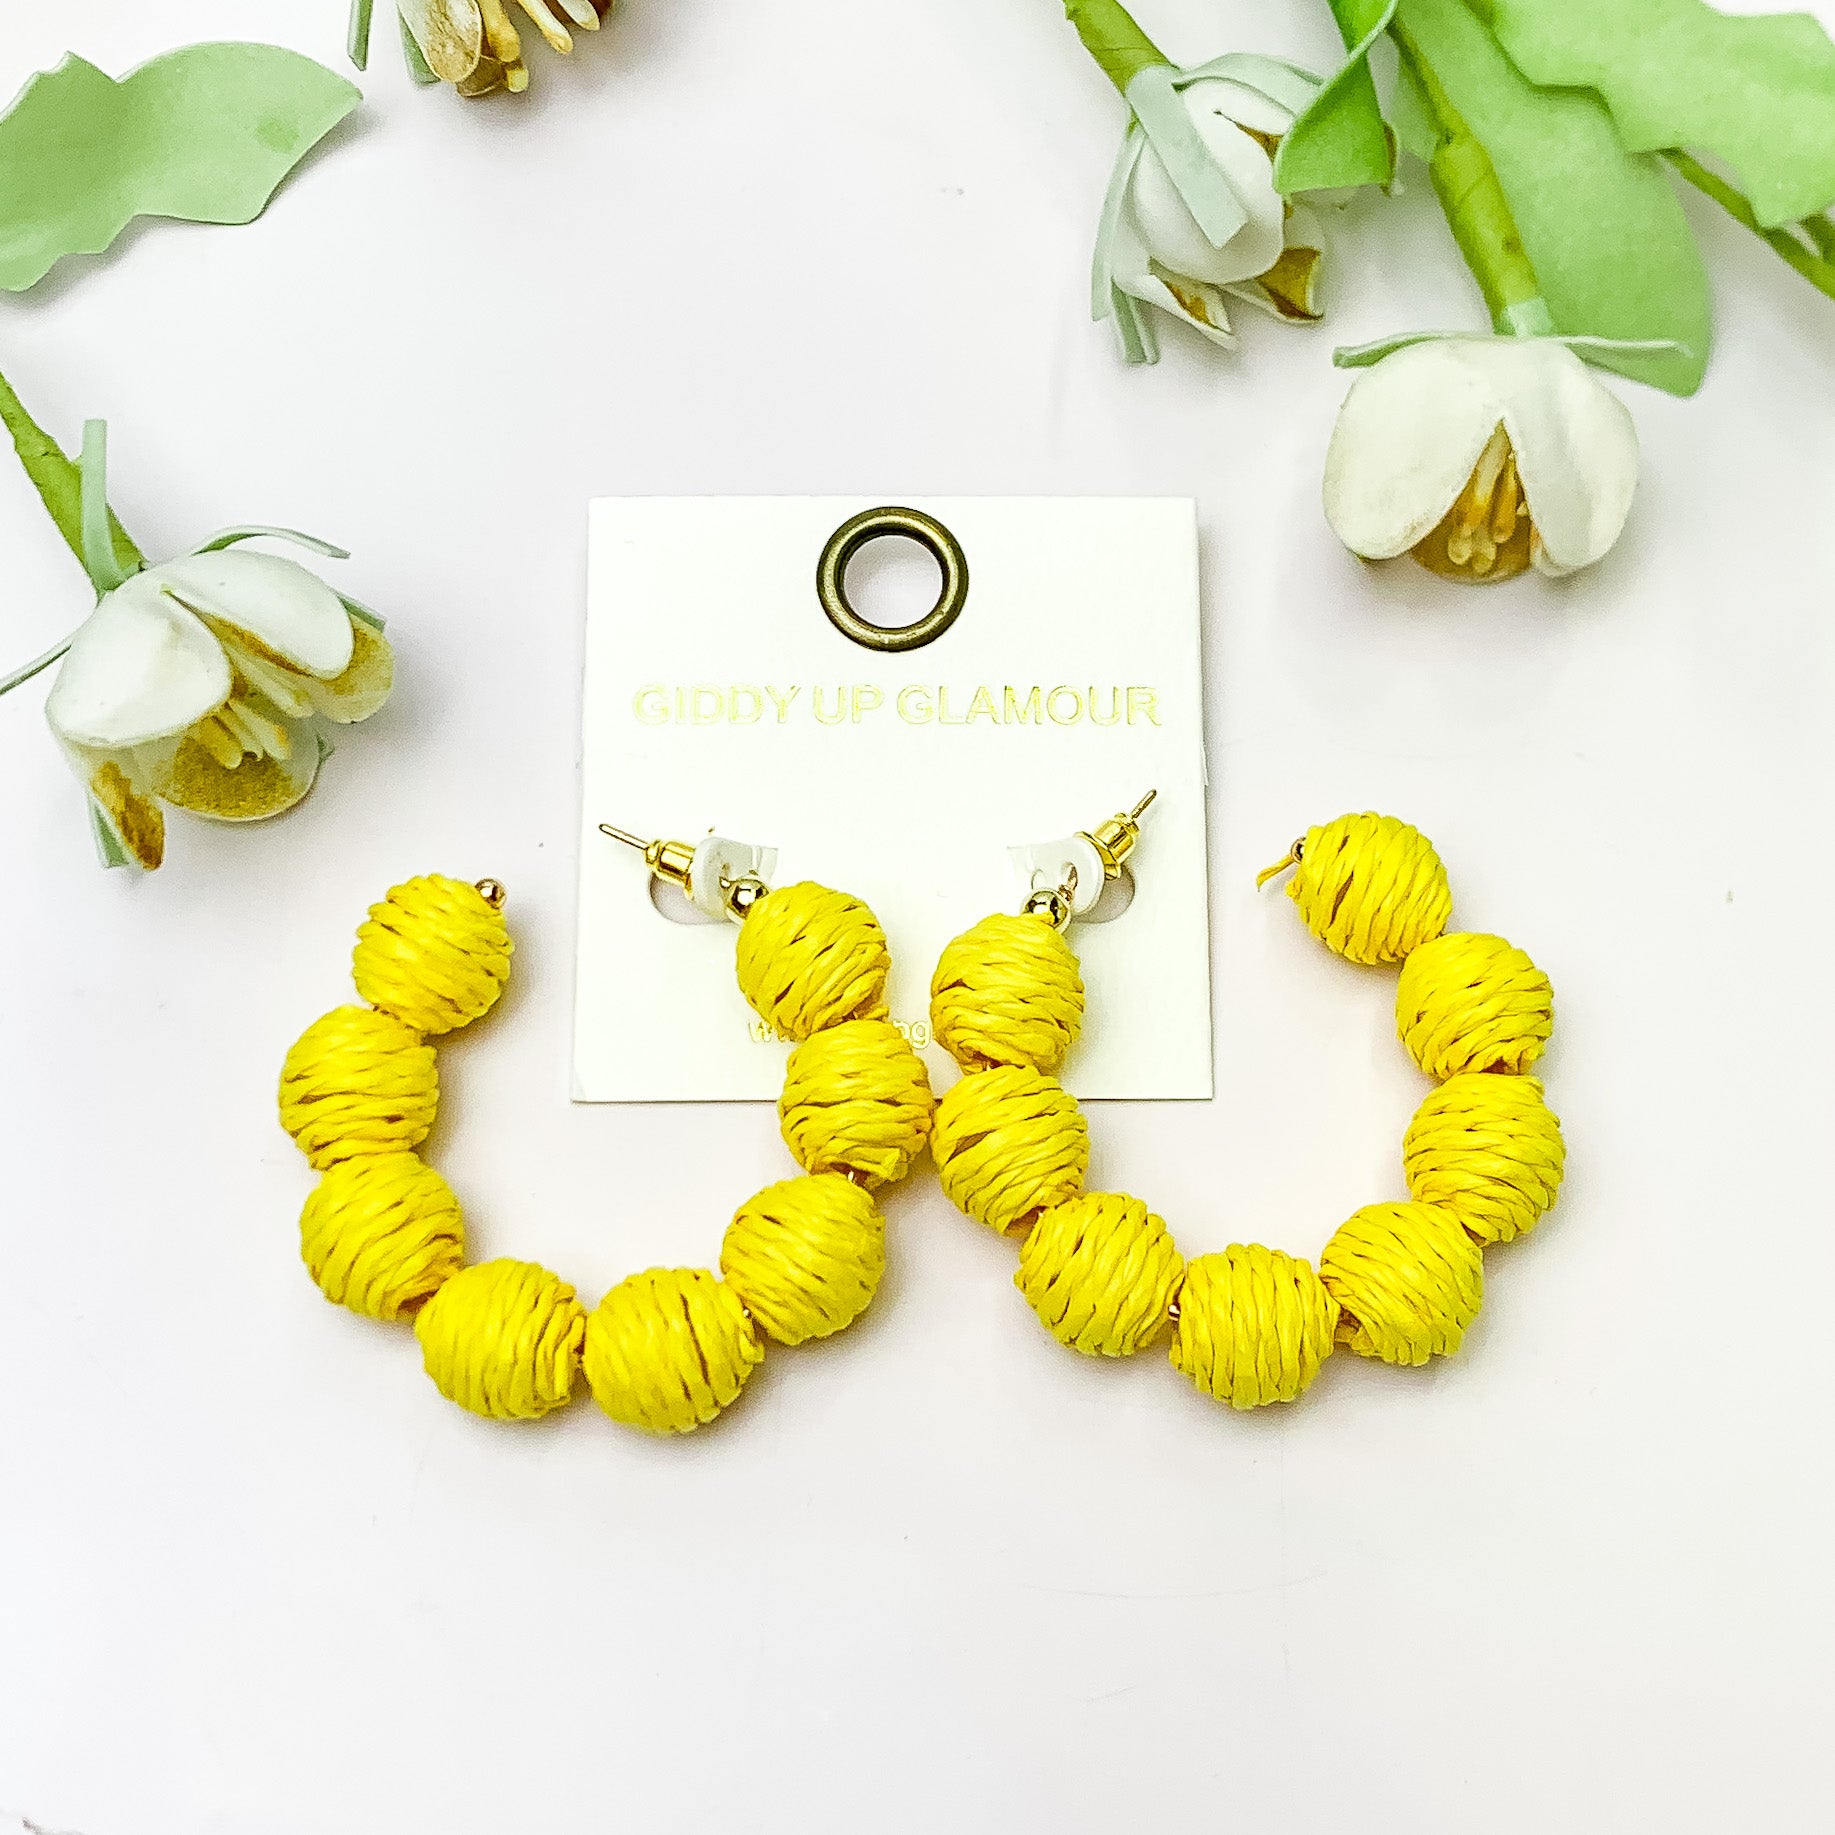 Sorbet Summer Raffia Ball Hoop Earrings in Yellow. Pictured on a white background with flowers above the earrings.